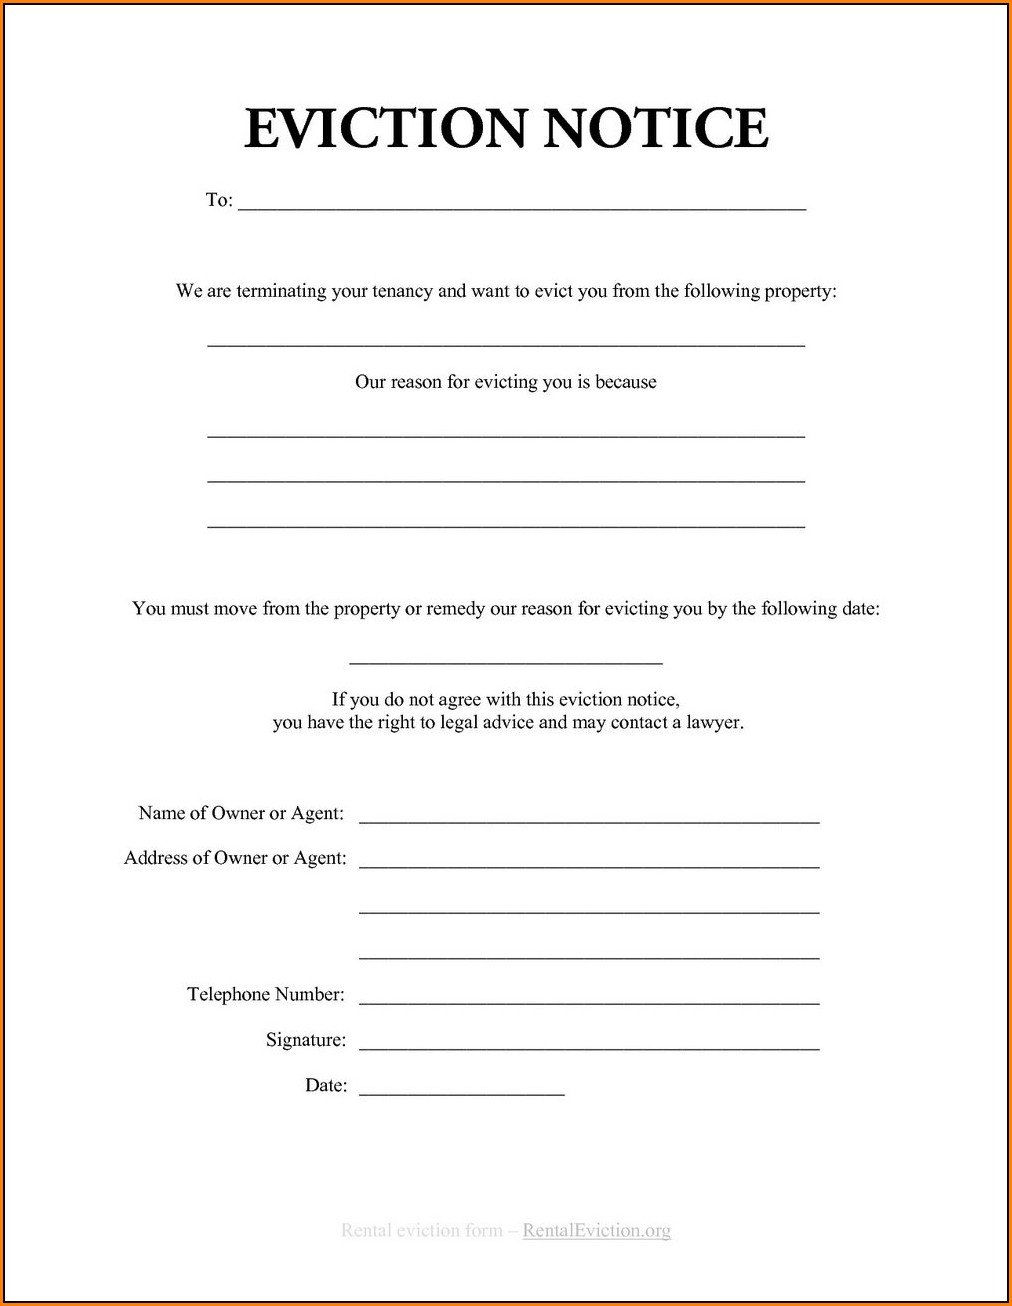 Eviction Notice Forms To Print Out